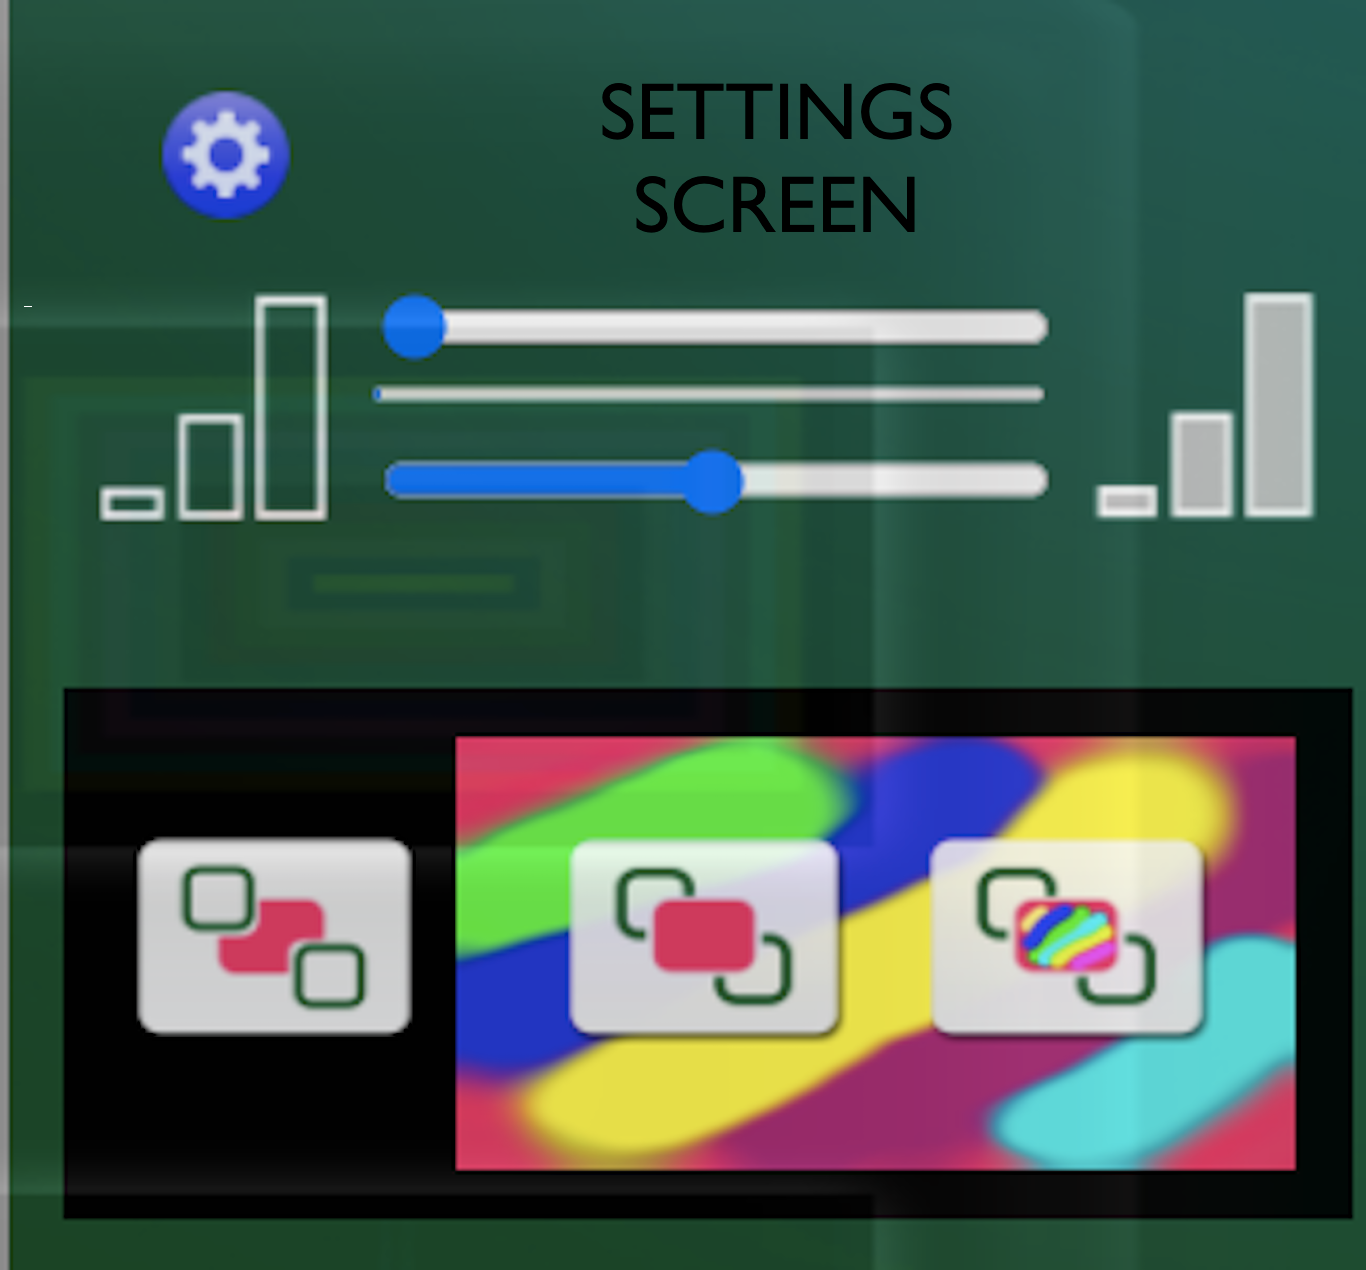 Sensory SpeakUp sound and color settings